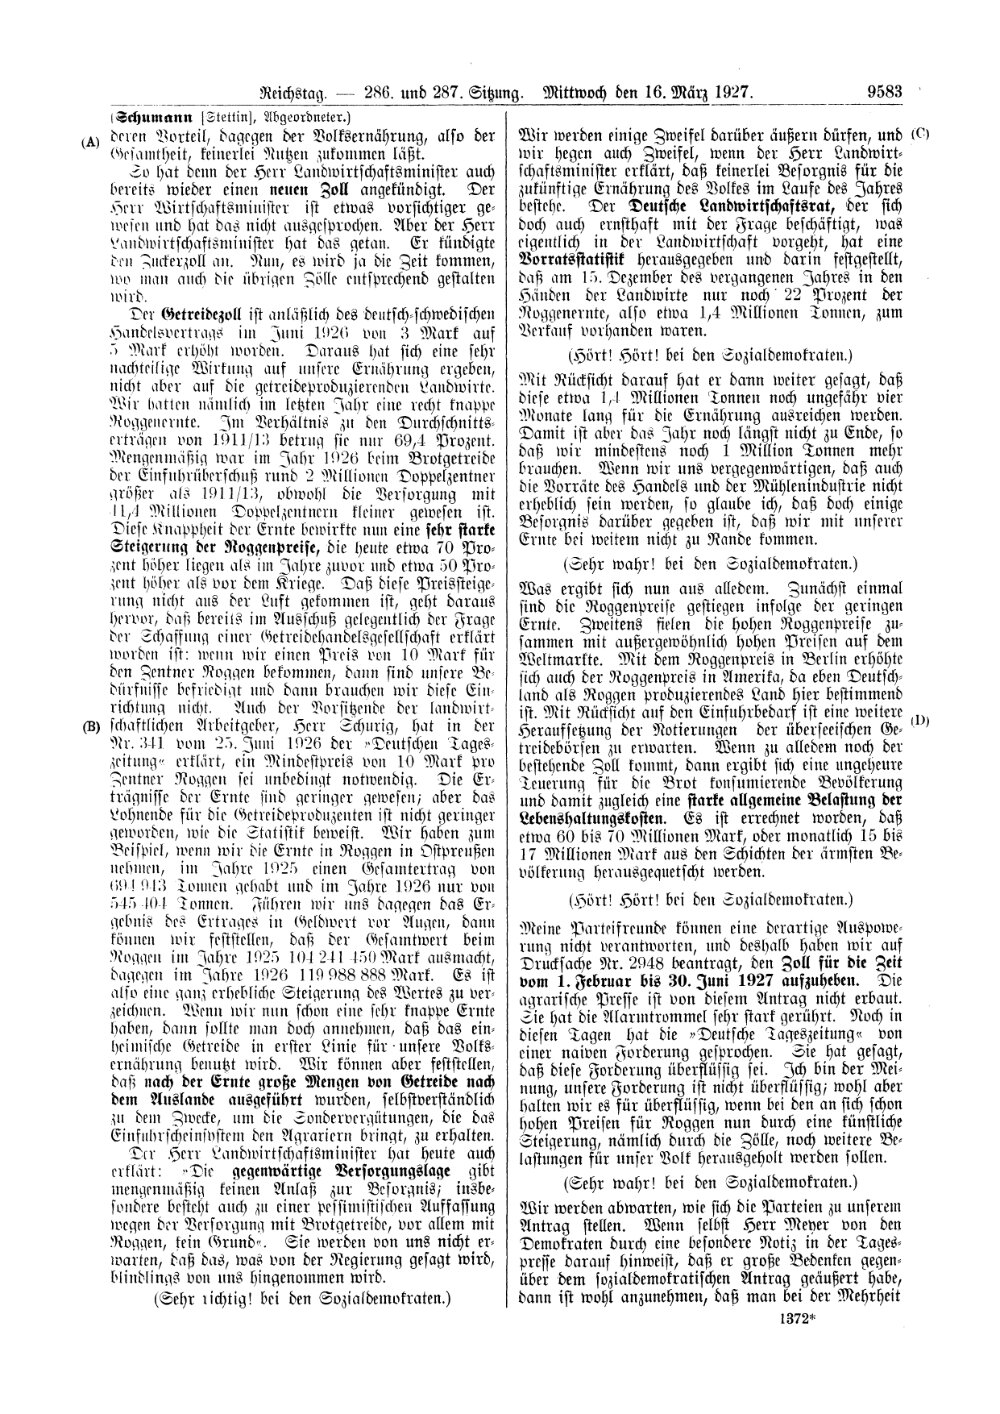 Scan of page 9583